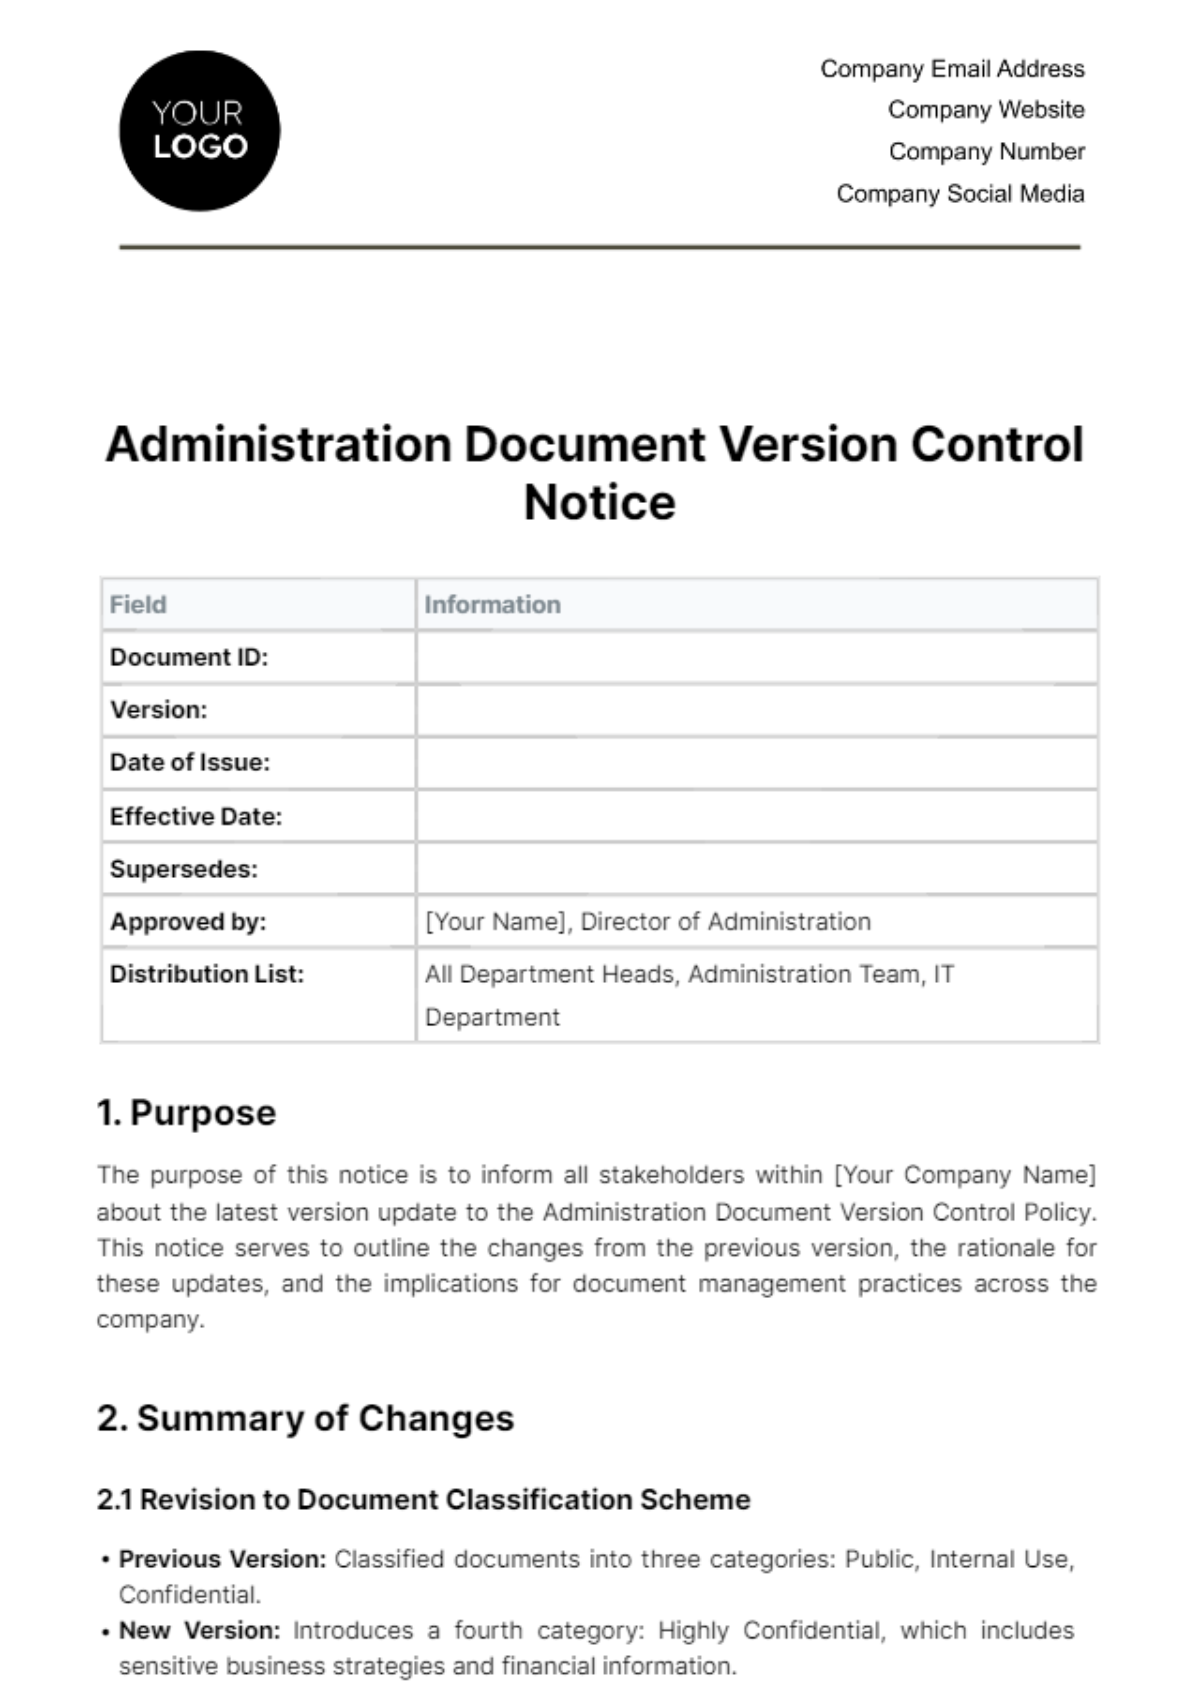 Free Administration Document Version Control Notice Template